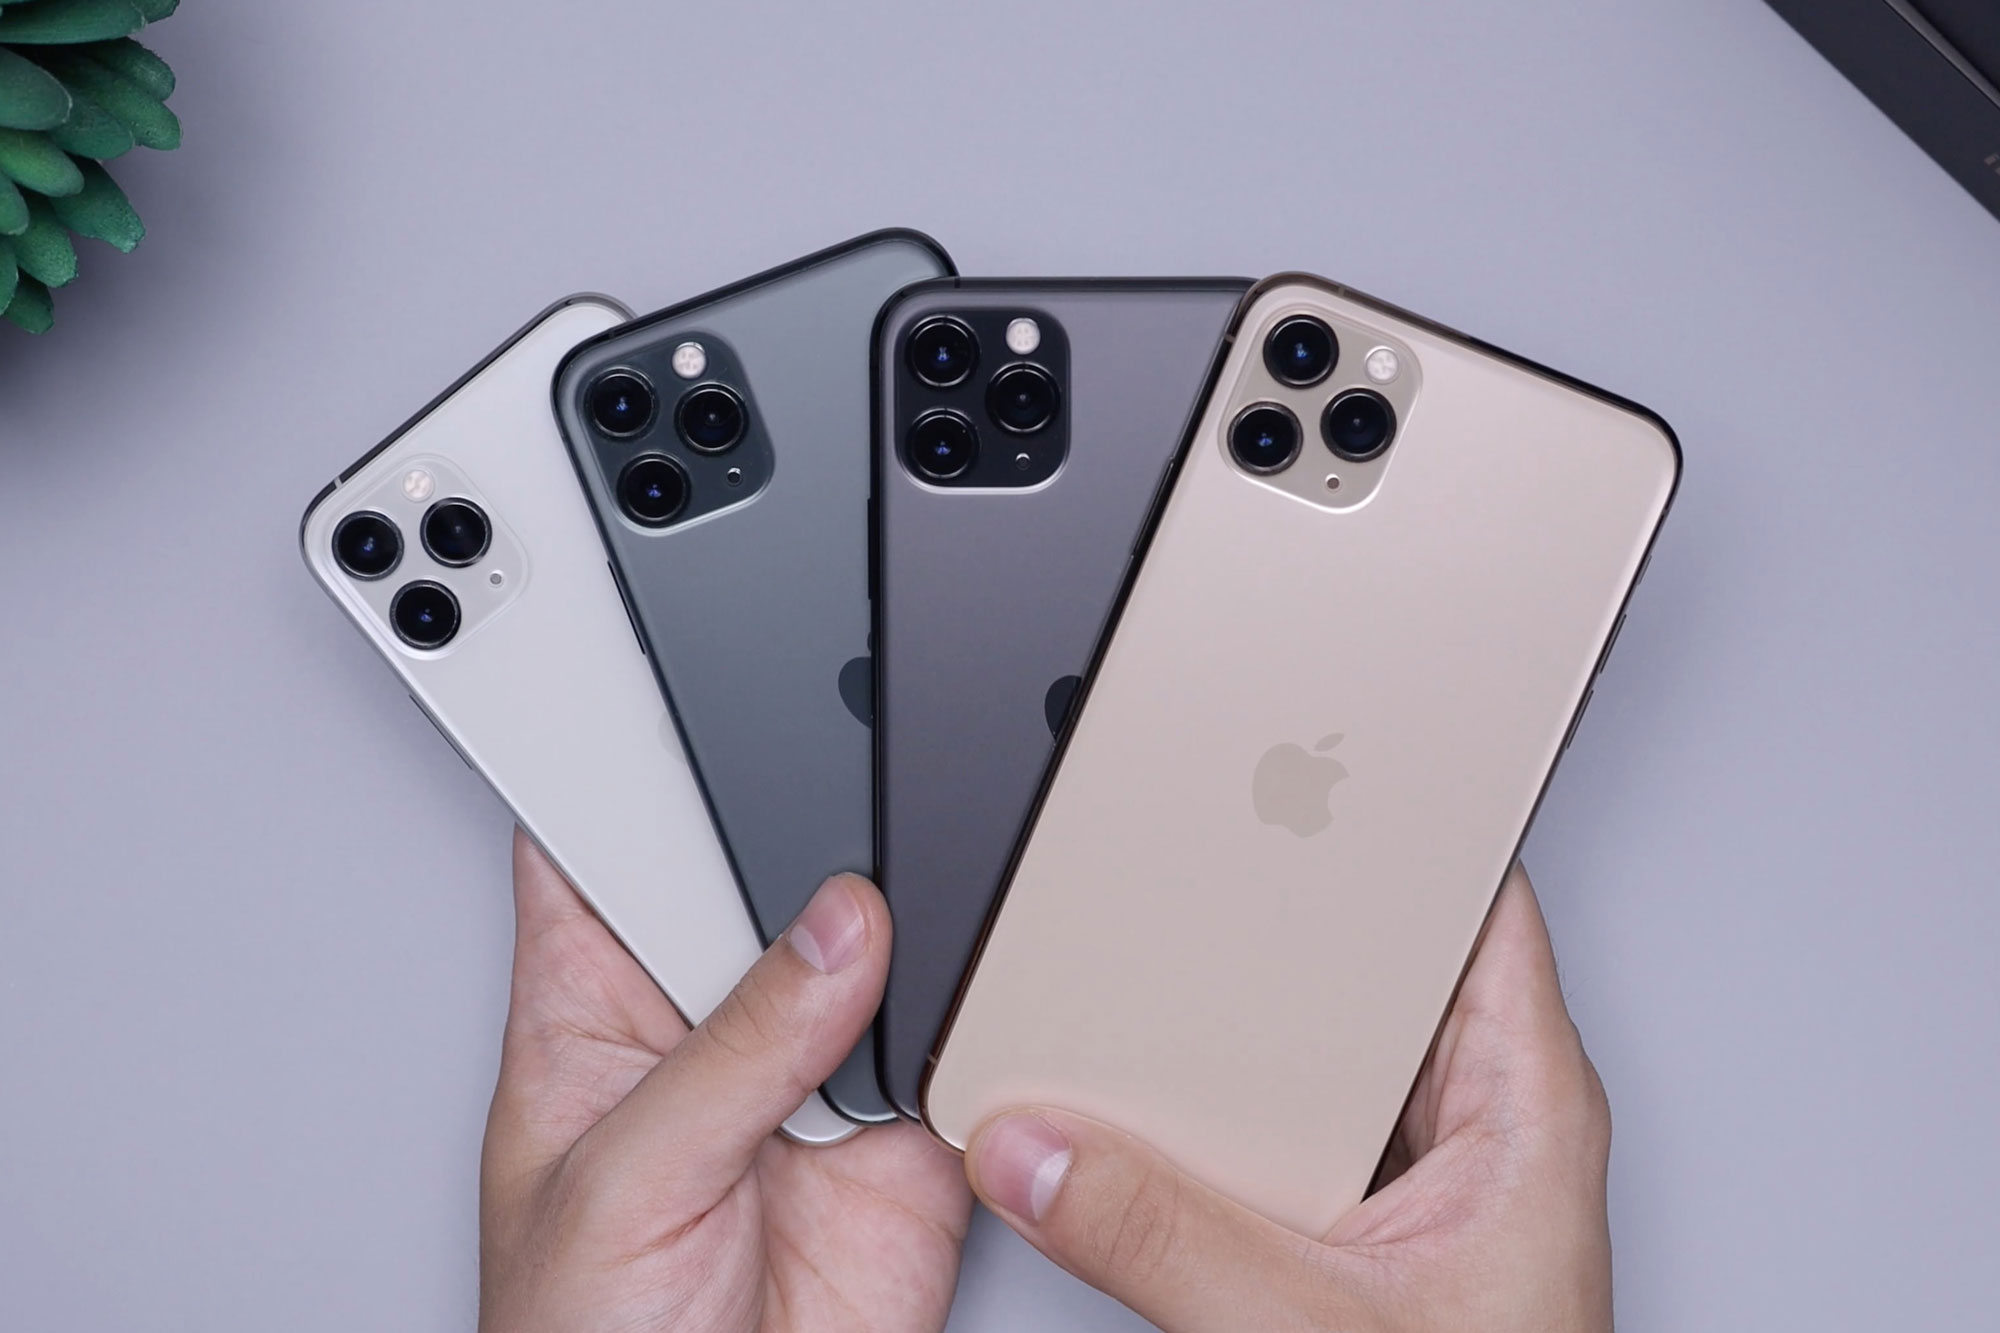 Apple iPhone: Compare Versions and Models from the X to iPhone 13